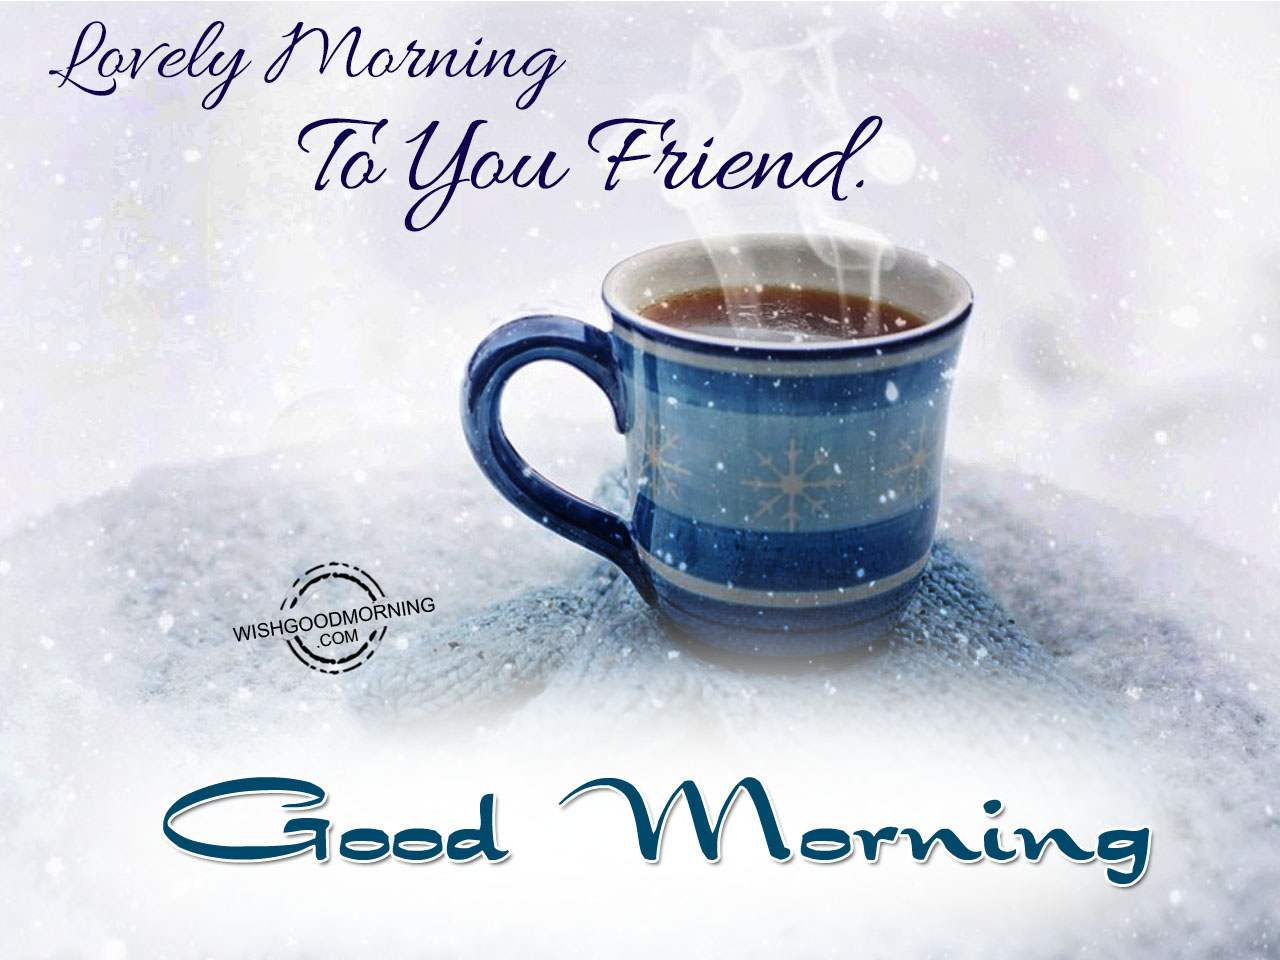 Lovely Morning To You Friend – Good Morning - Good Morning ...